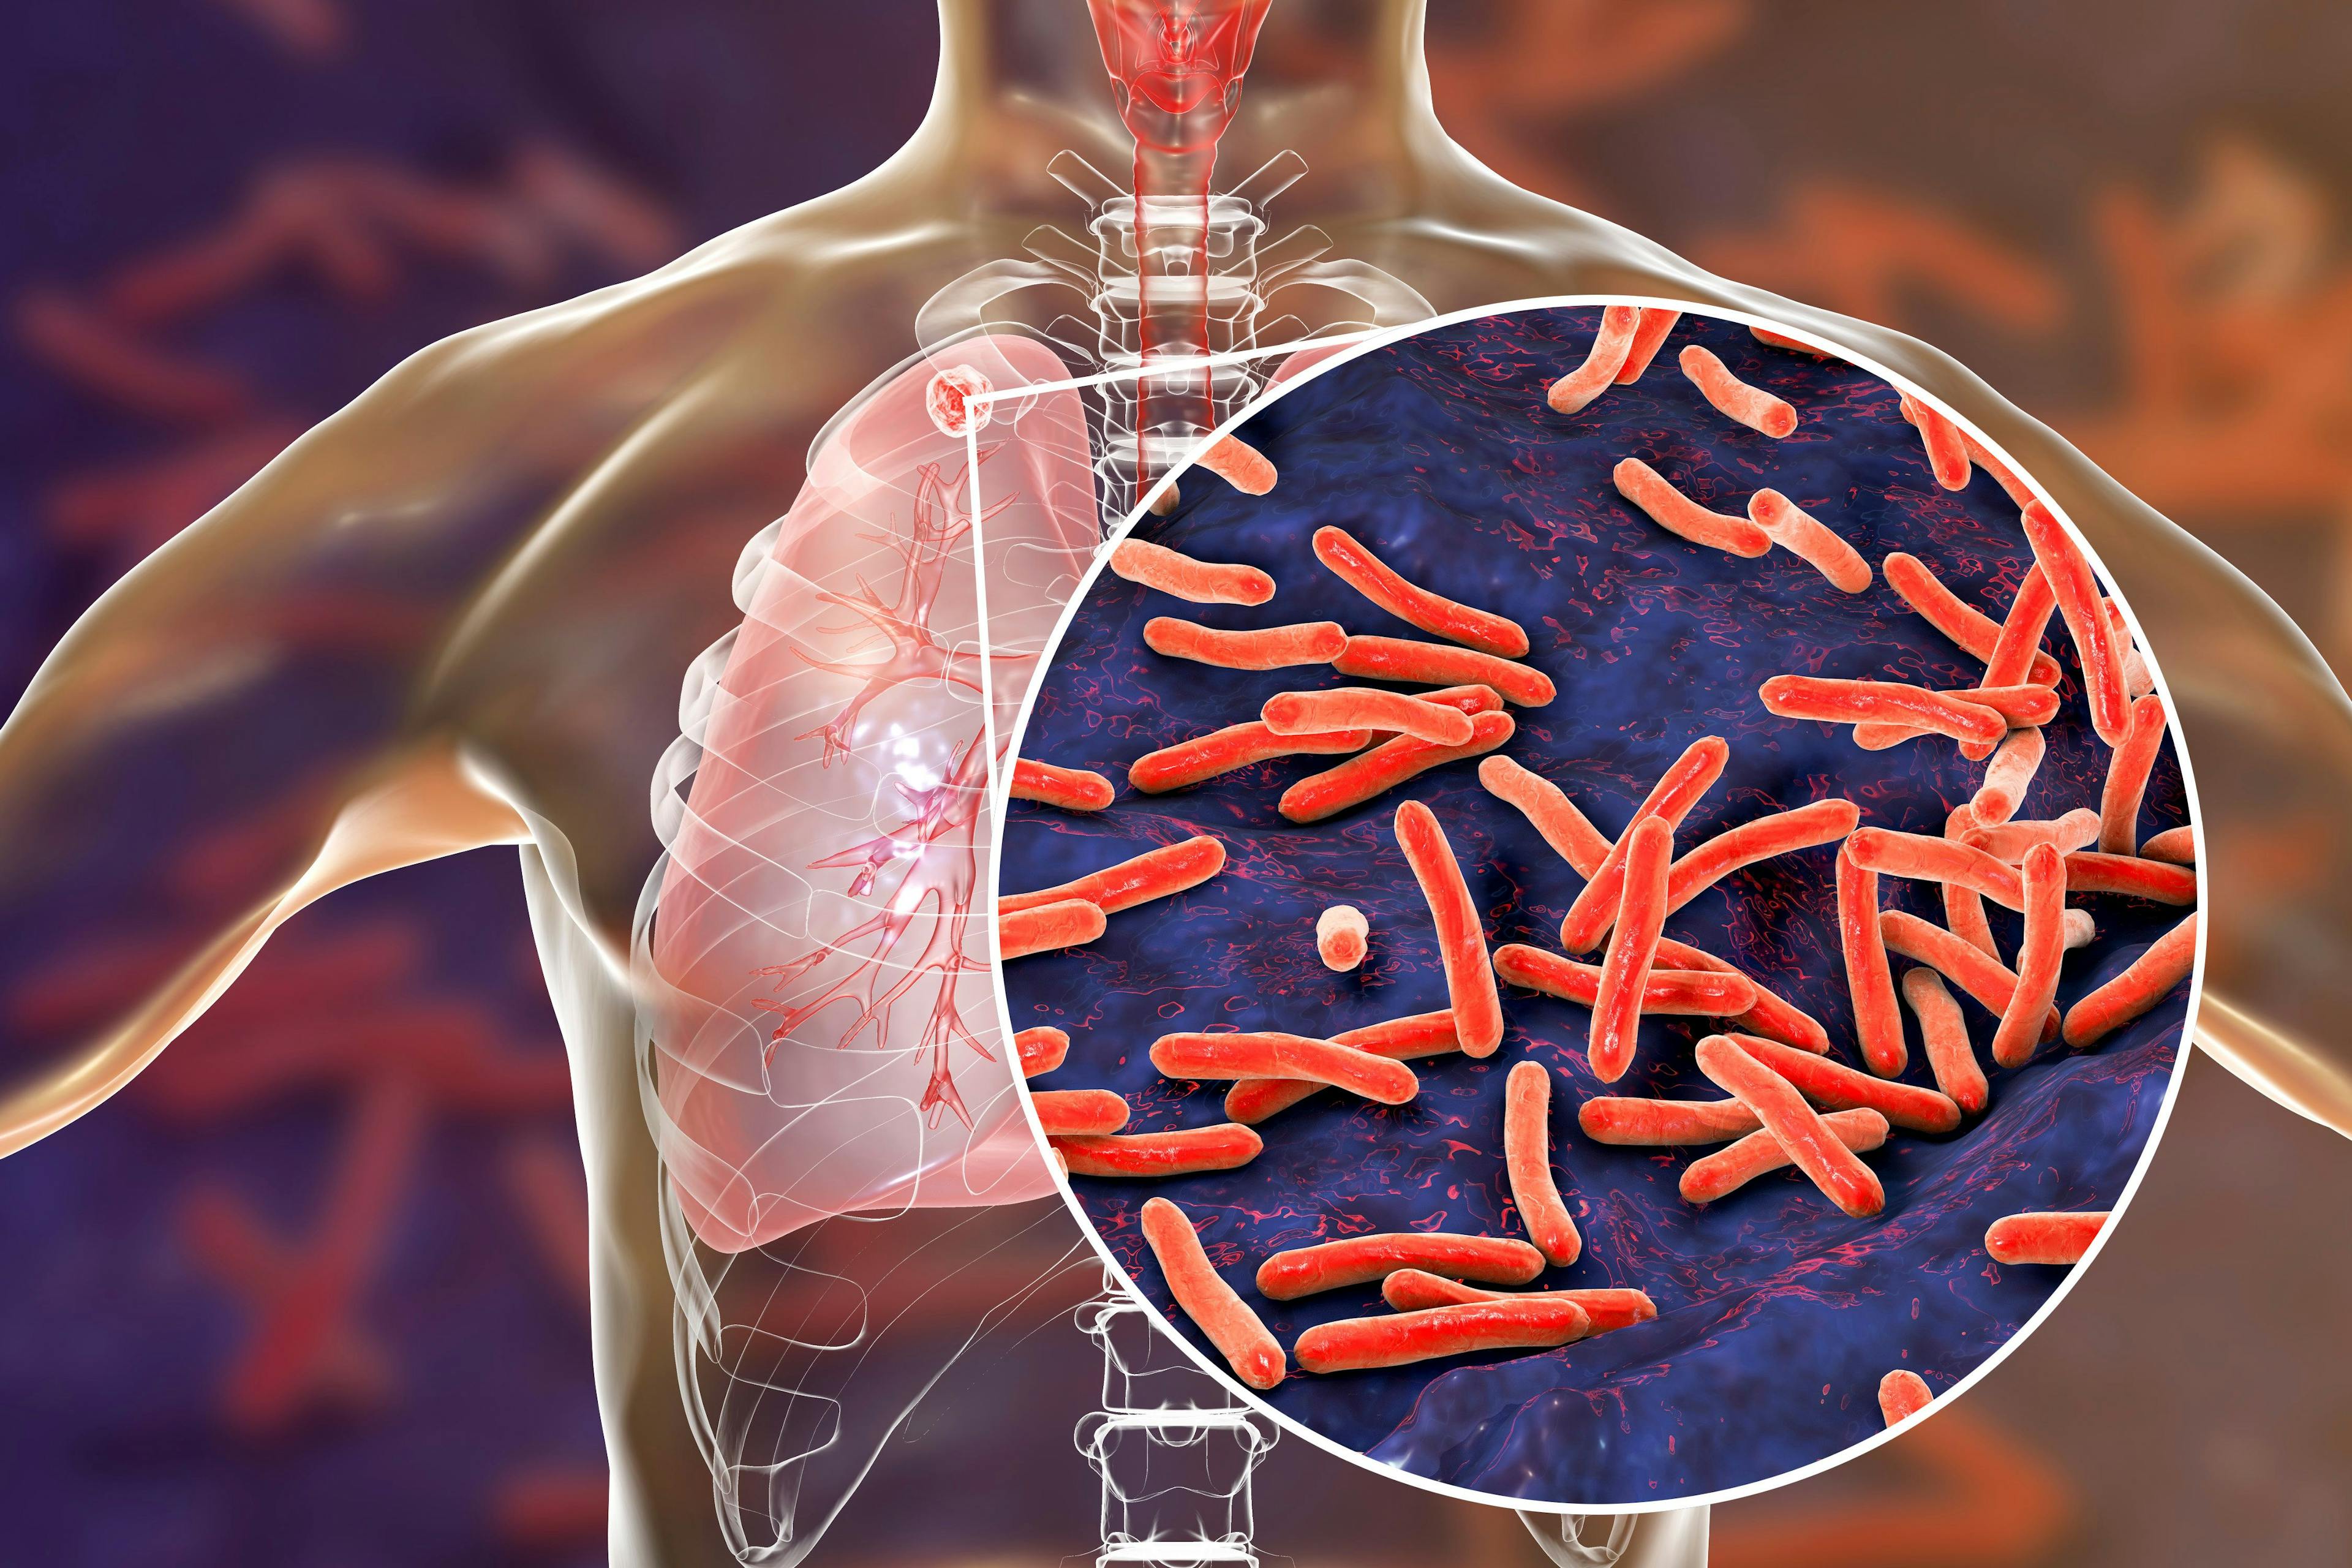 Mycobacterium tuberculosis bacteria in the lungs -- Image credit: Dr_Microbe | stock.adobe.com